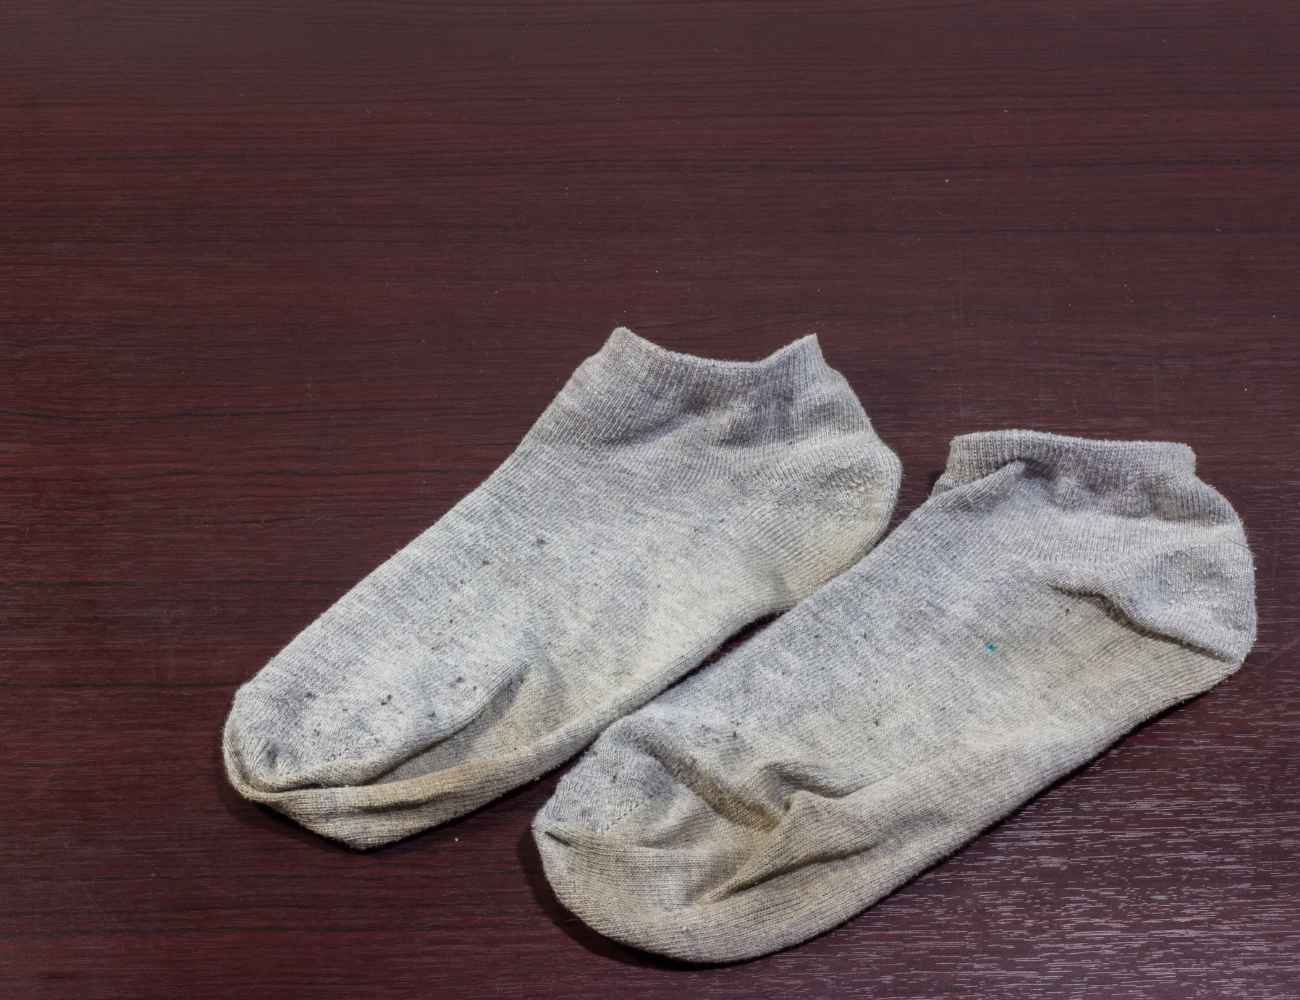 Is It Legal To Sell Used Socks Online? Well, It Depends